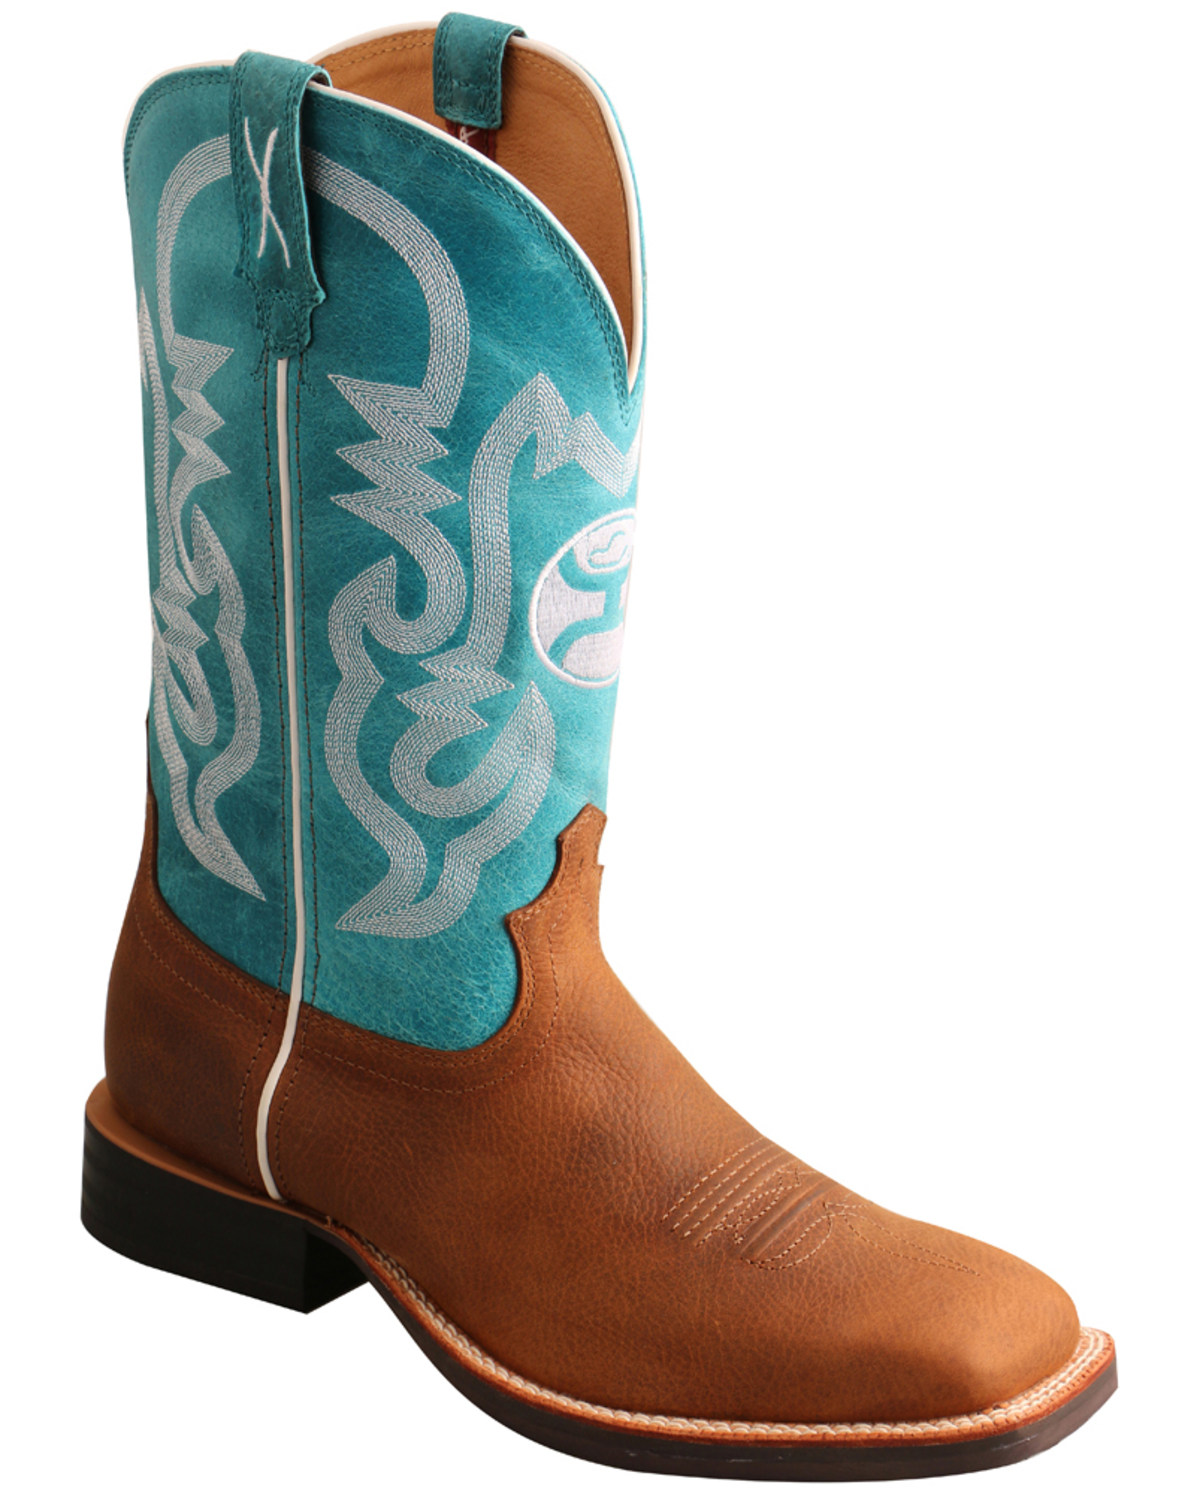 Hooey by Twisted X Men's Western Boots - Broad Square Toe